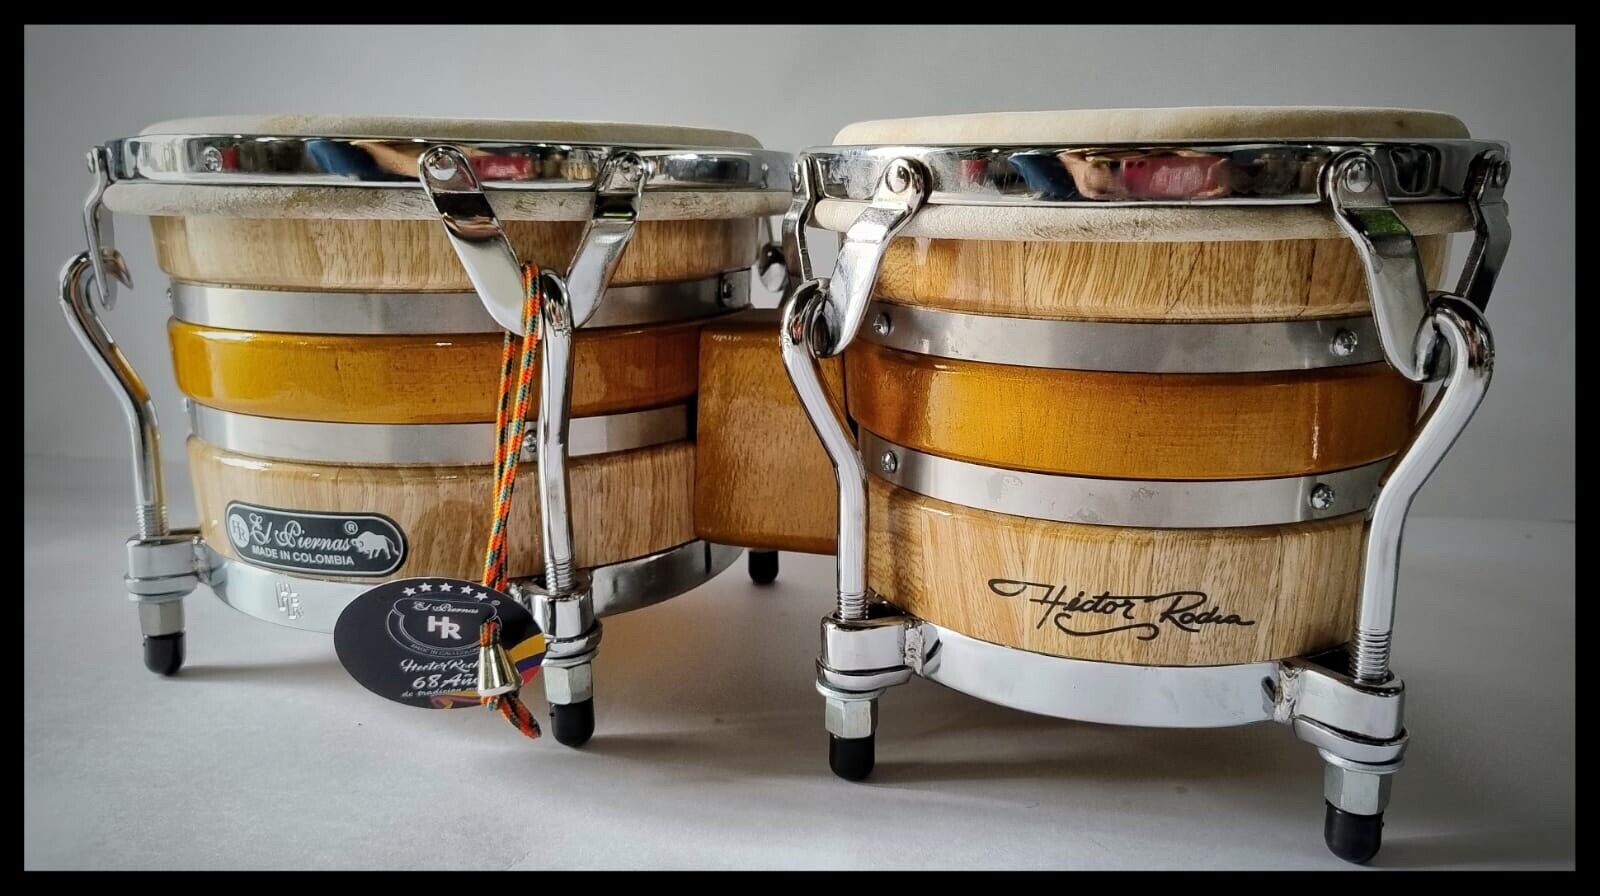 This Is A Set Hand Made HR El piernas Bongo From Colombia Natural Wood 6